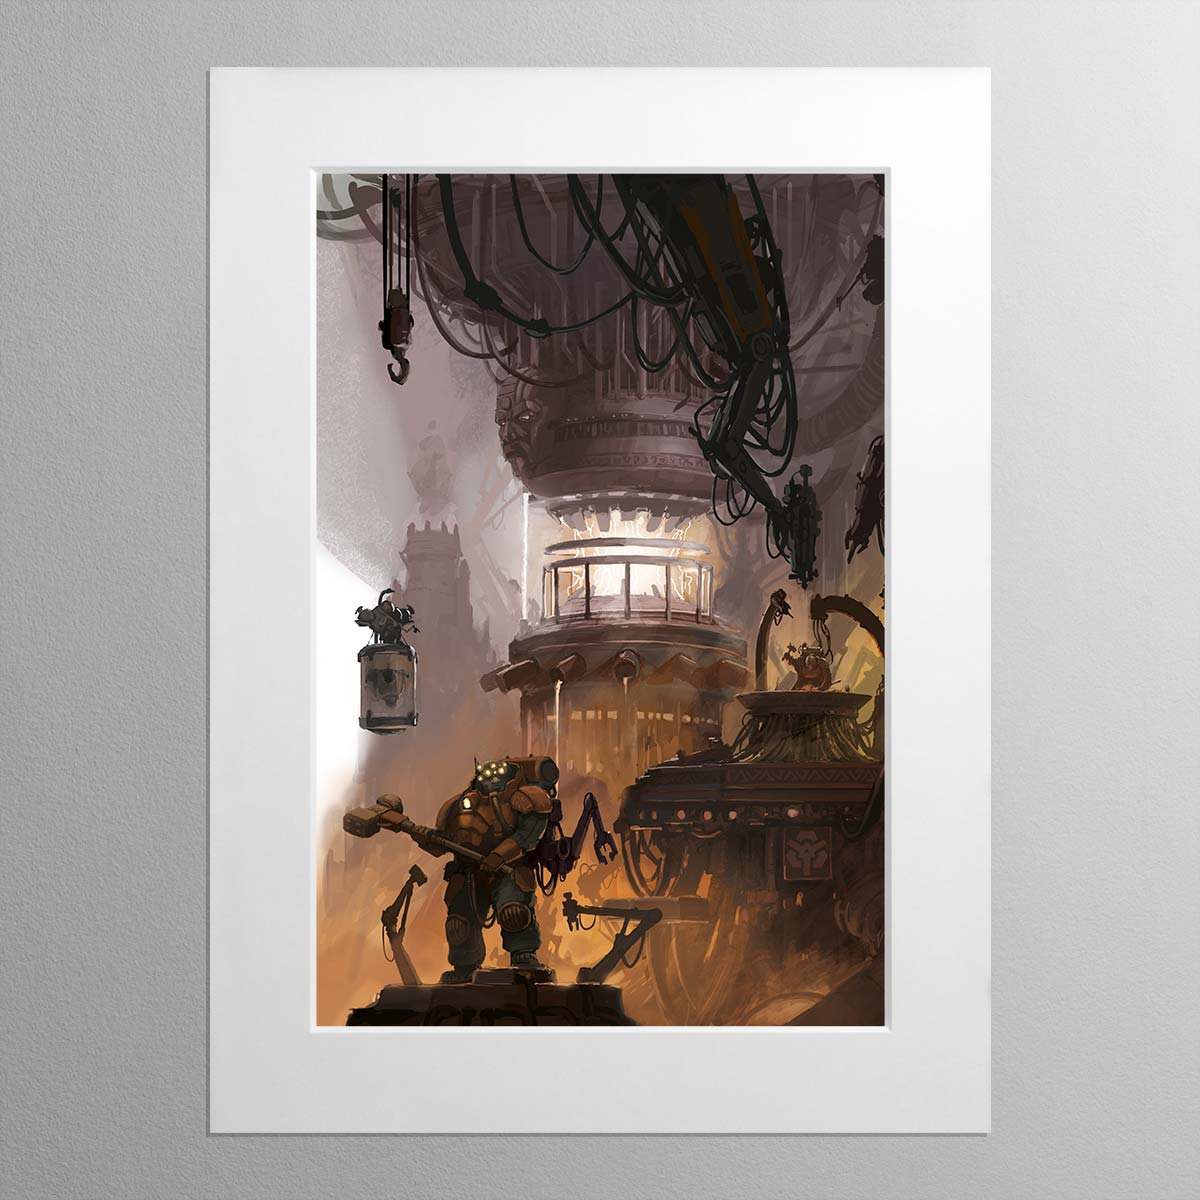 Leagues of Votann Relics Forge – Mounted Print